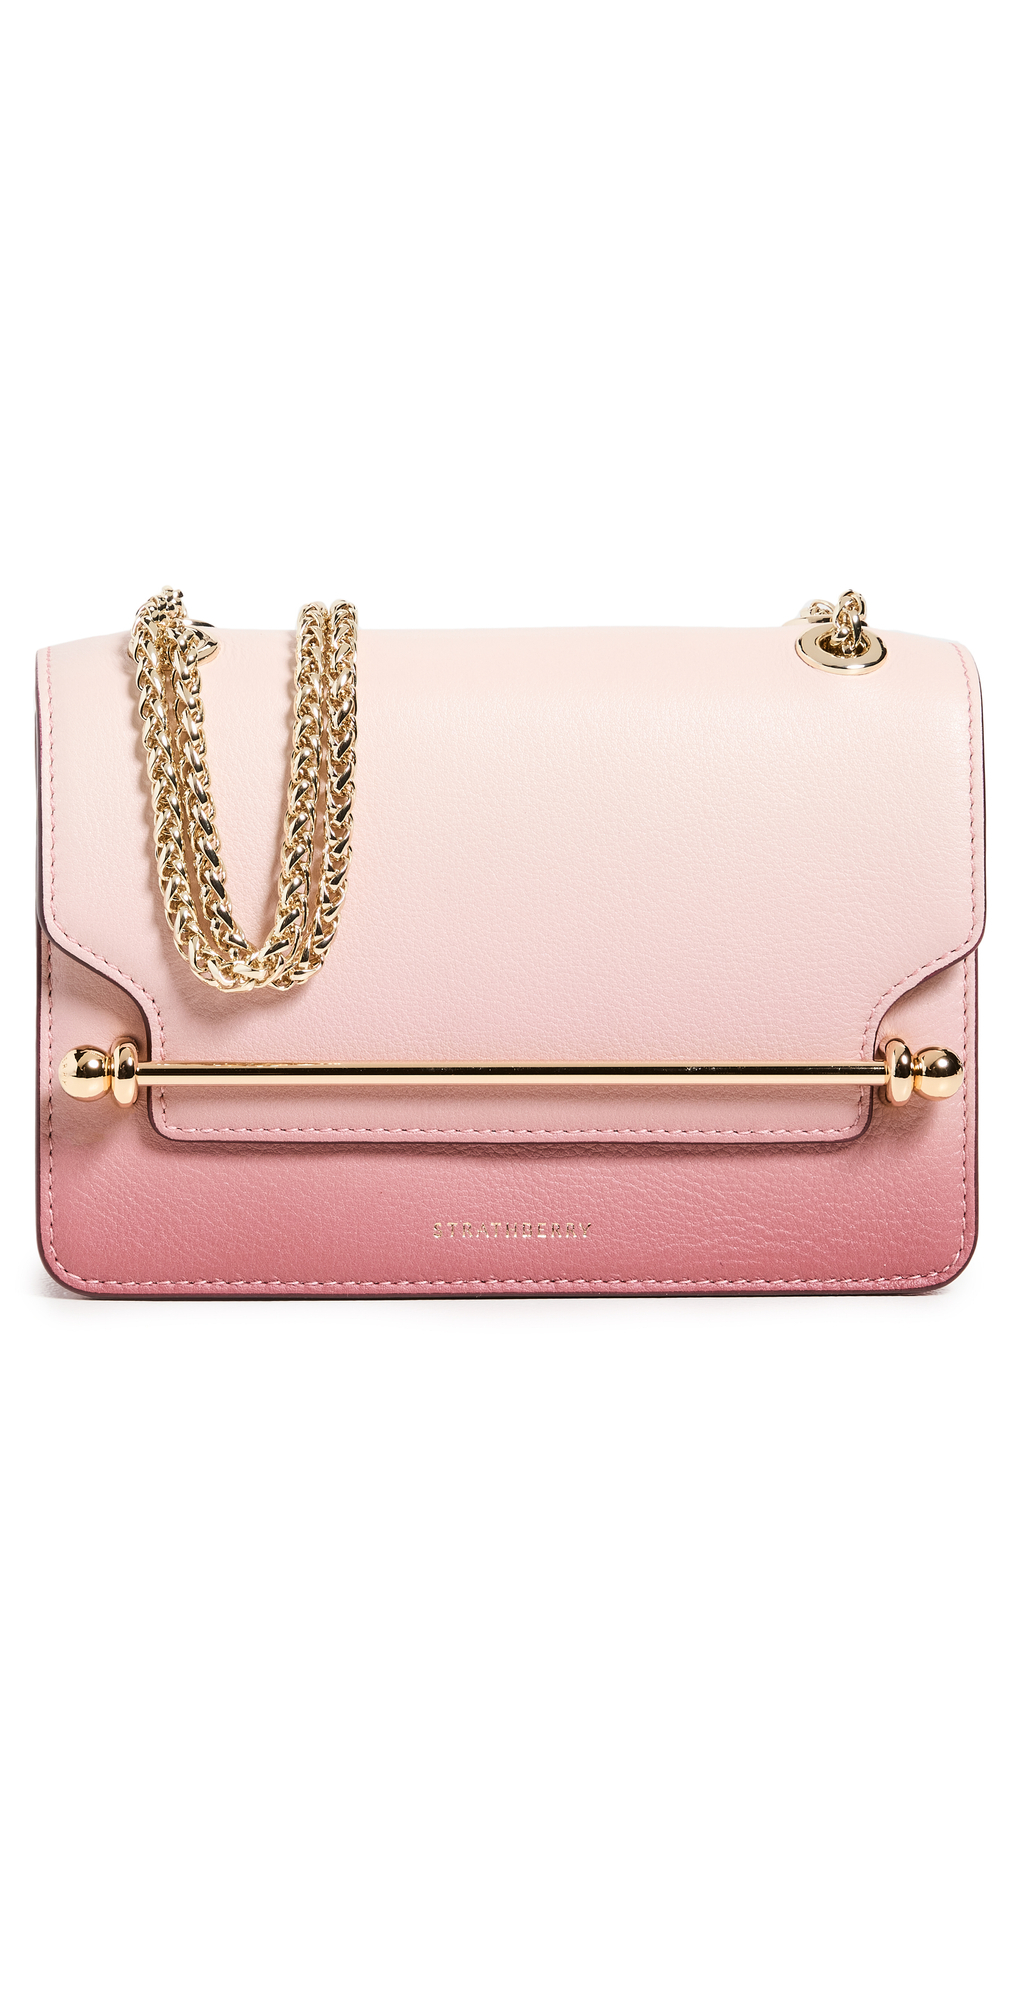 Strathberry East West Mini Bag in pink